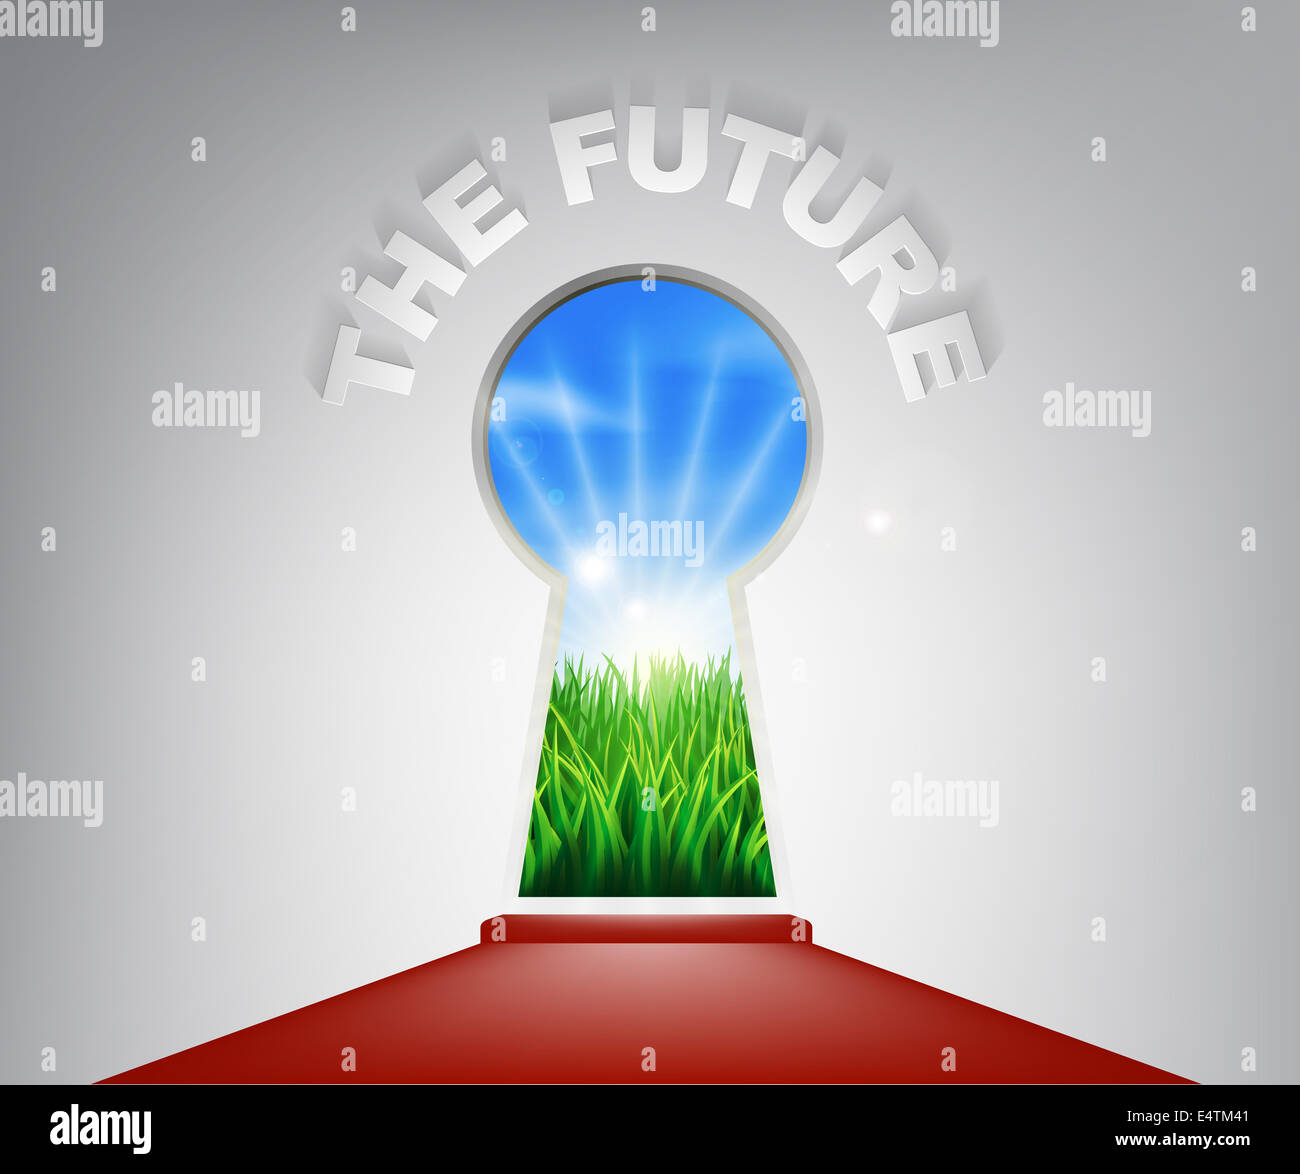 A conceptual illustration of keyhole entrance to the future opening onto a field of lush green grass. Concept for a new life or Stock Photo